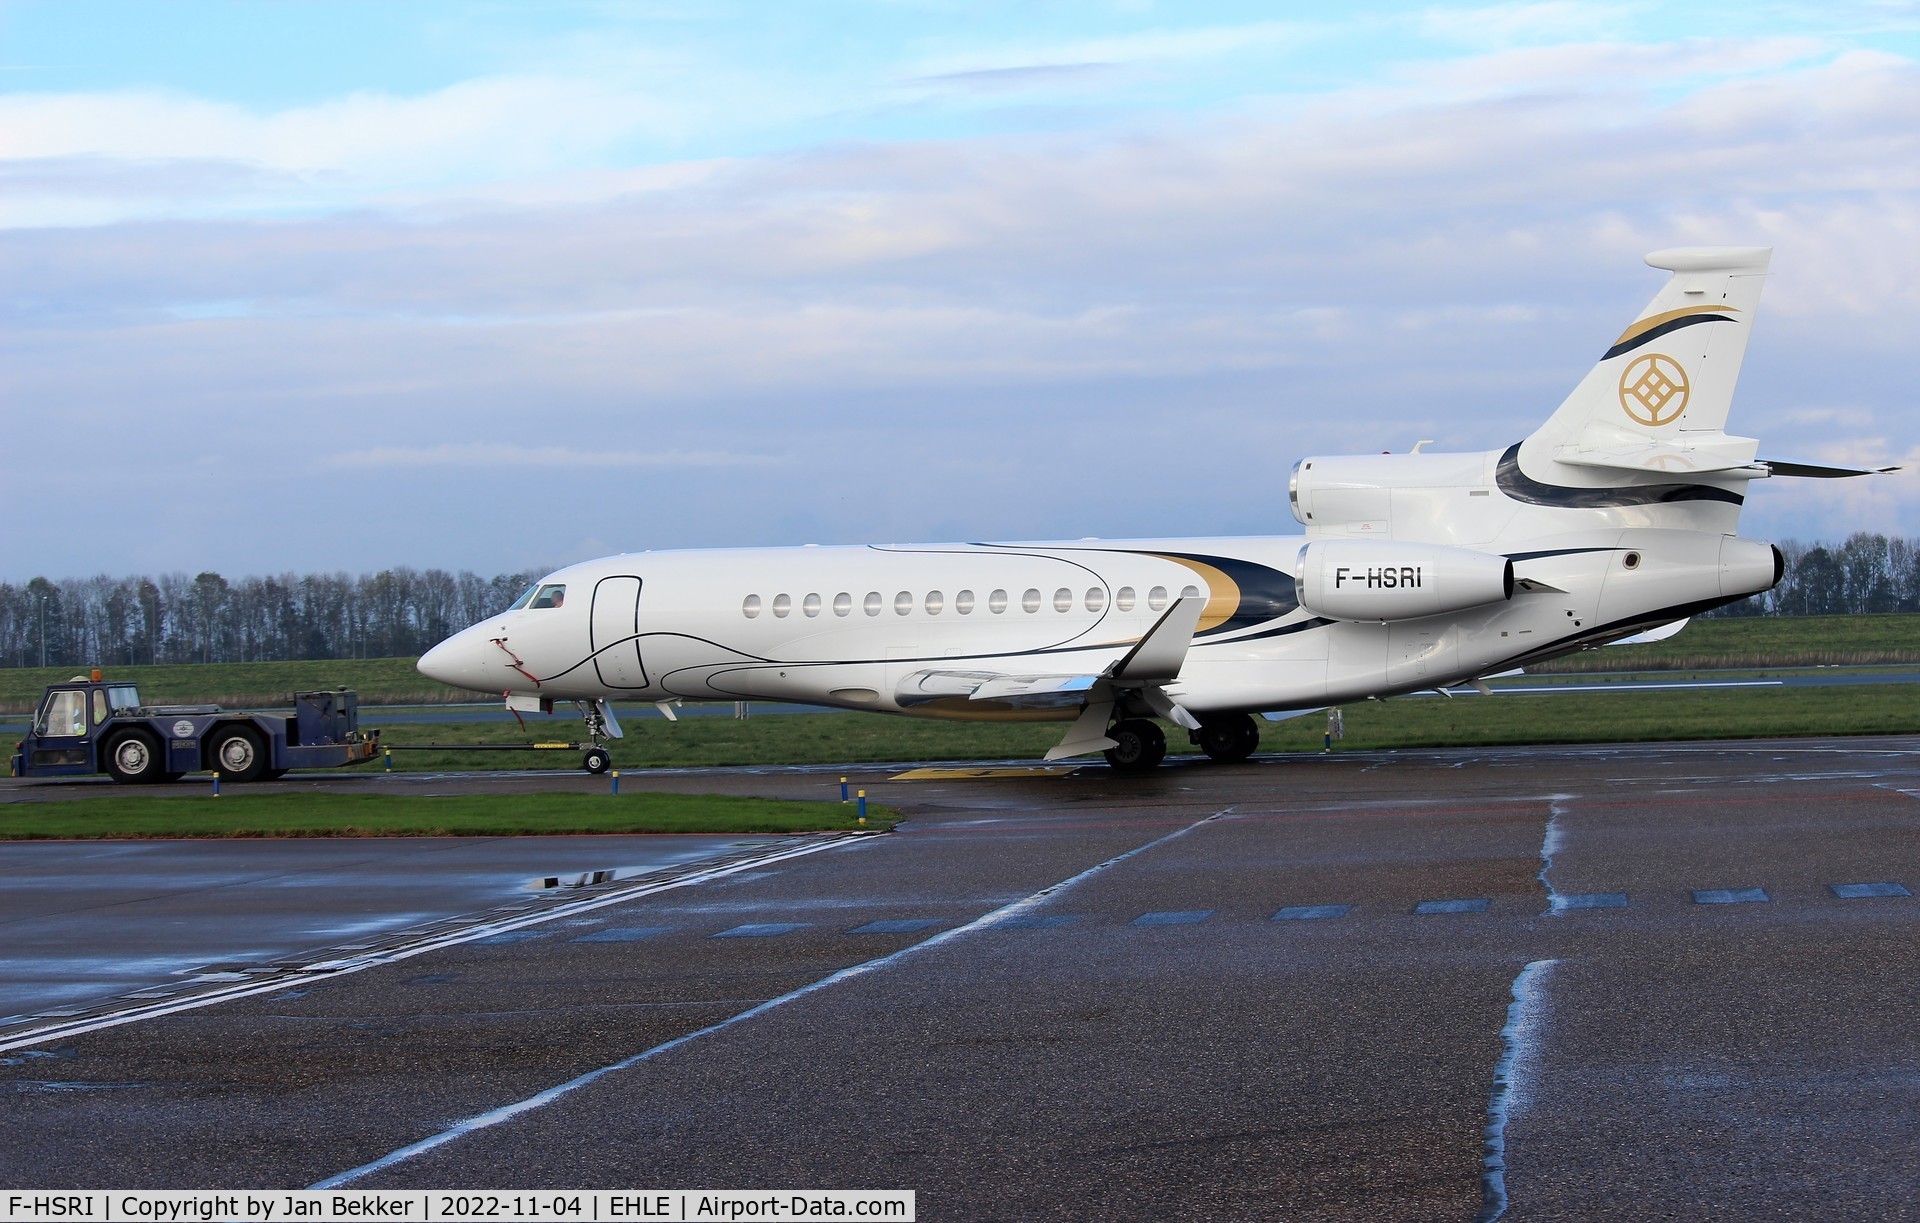 F-HSRI, 2017 Dassault Falcon 8X C/N 427, Lelystad Airport. Tugged from the apron to Satys where it will get a new livery